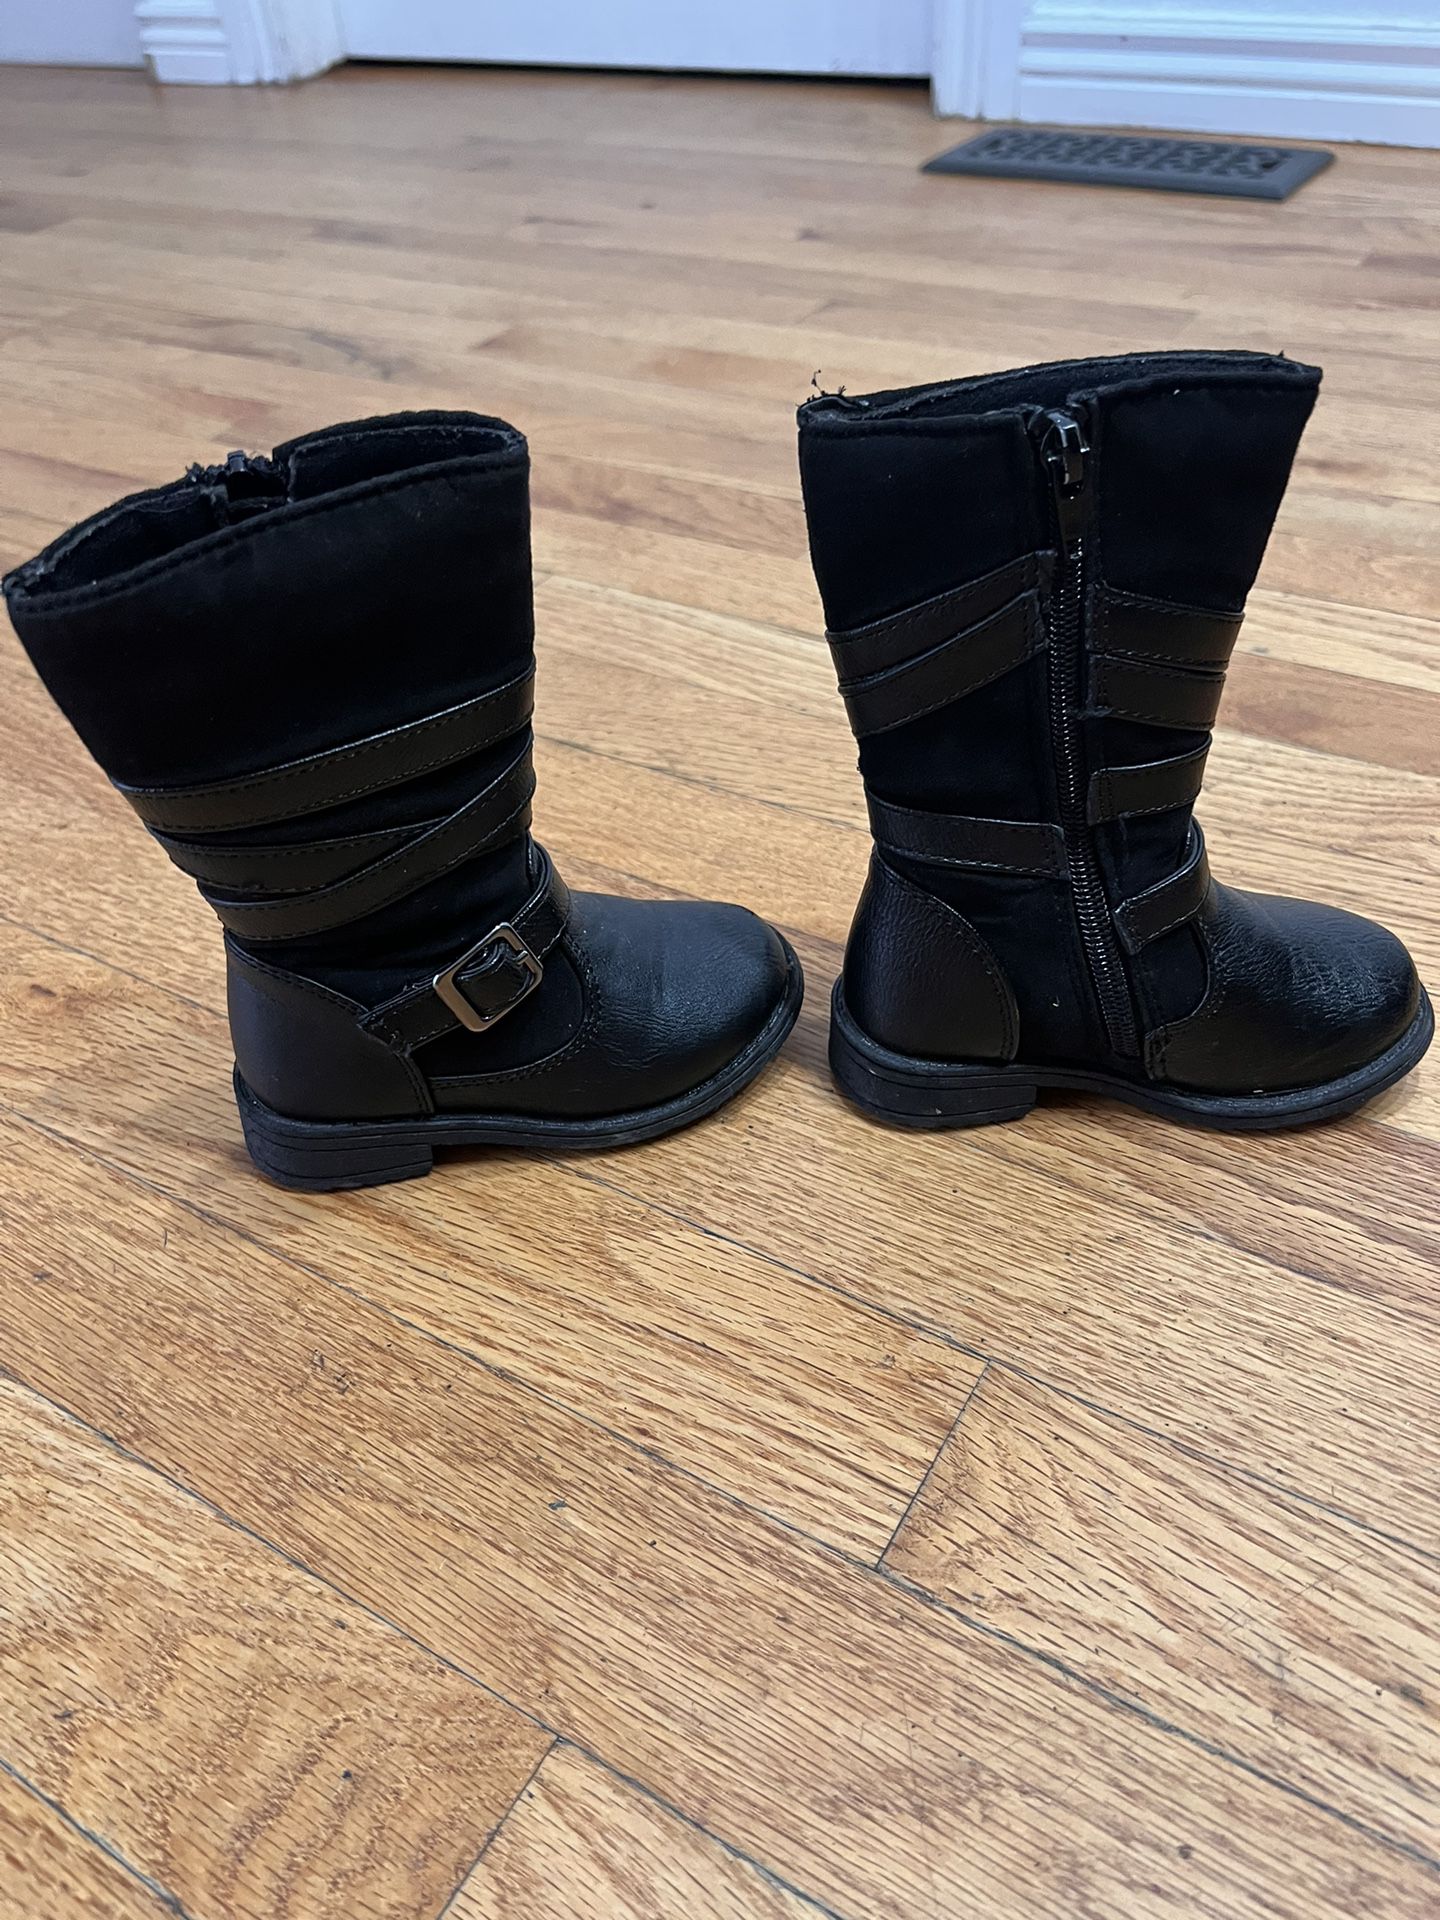 Toddler Size 5 Riding Boots